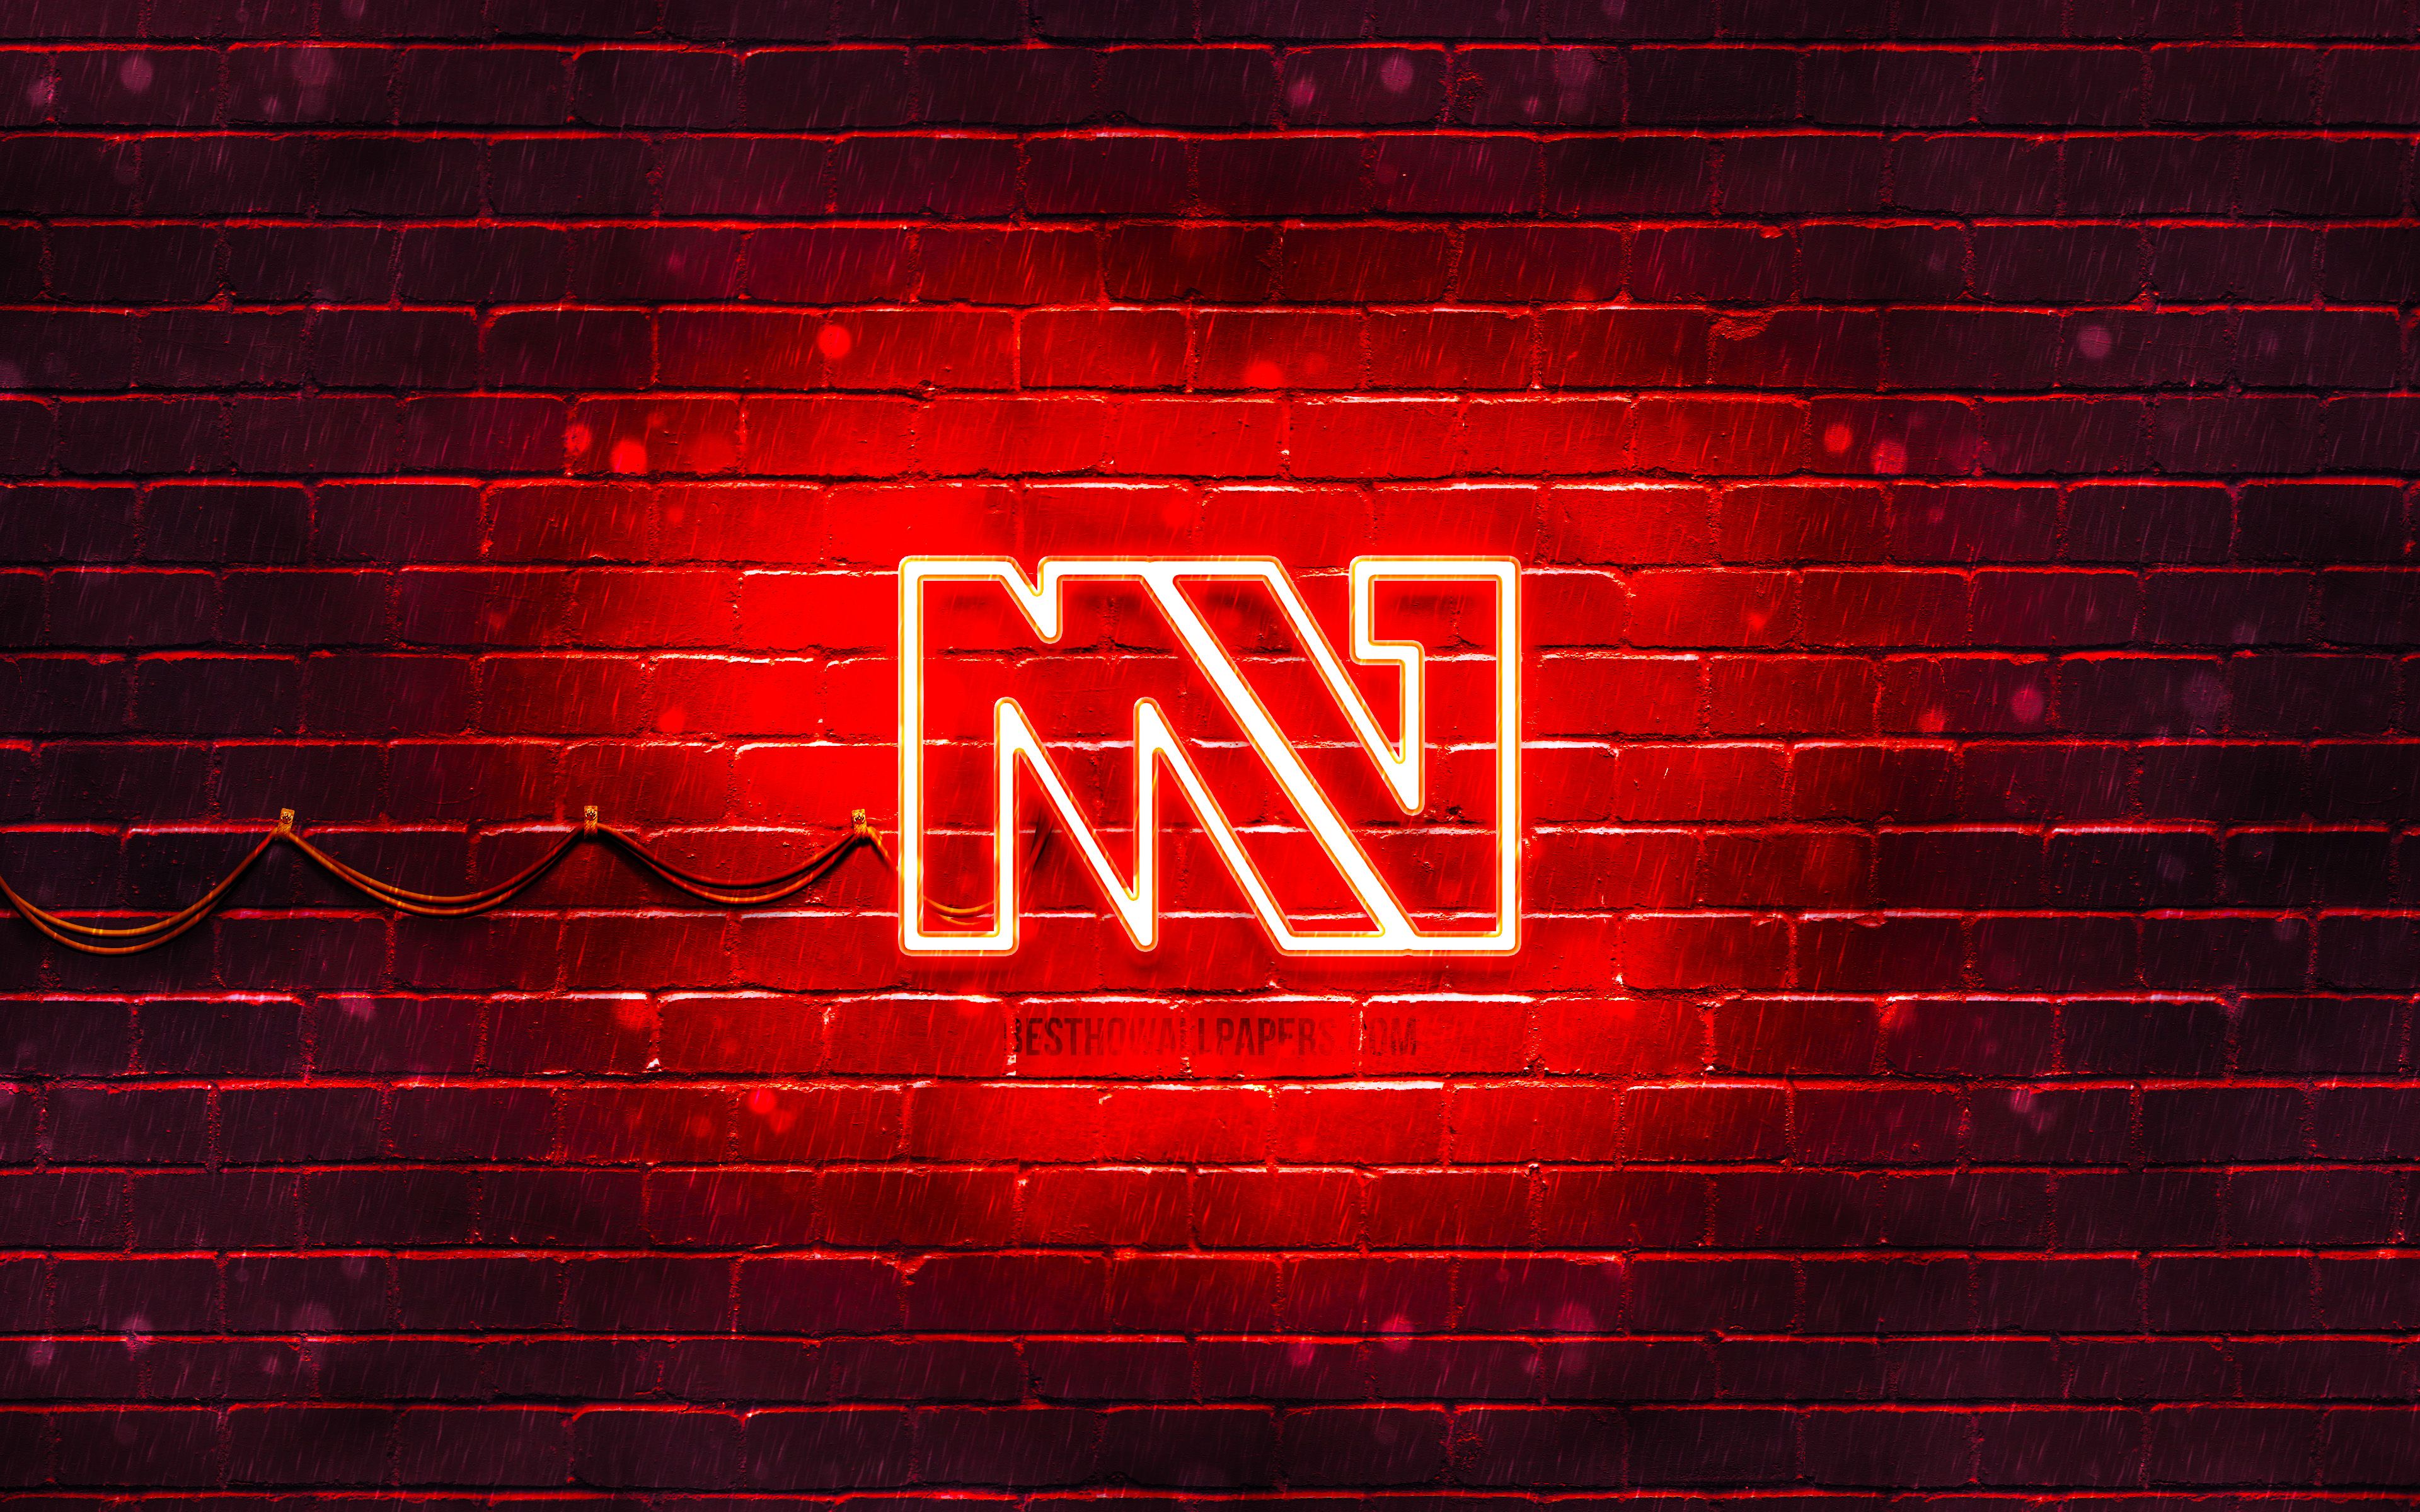 Download wallpaper Mo Vlogs red logo, 4k, MoVlogs, red brickwall